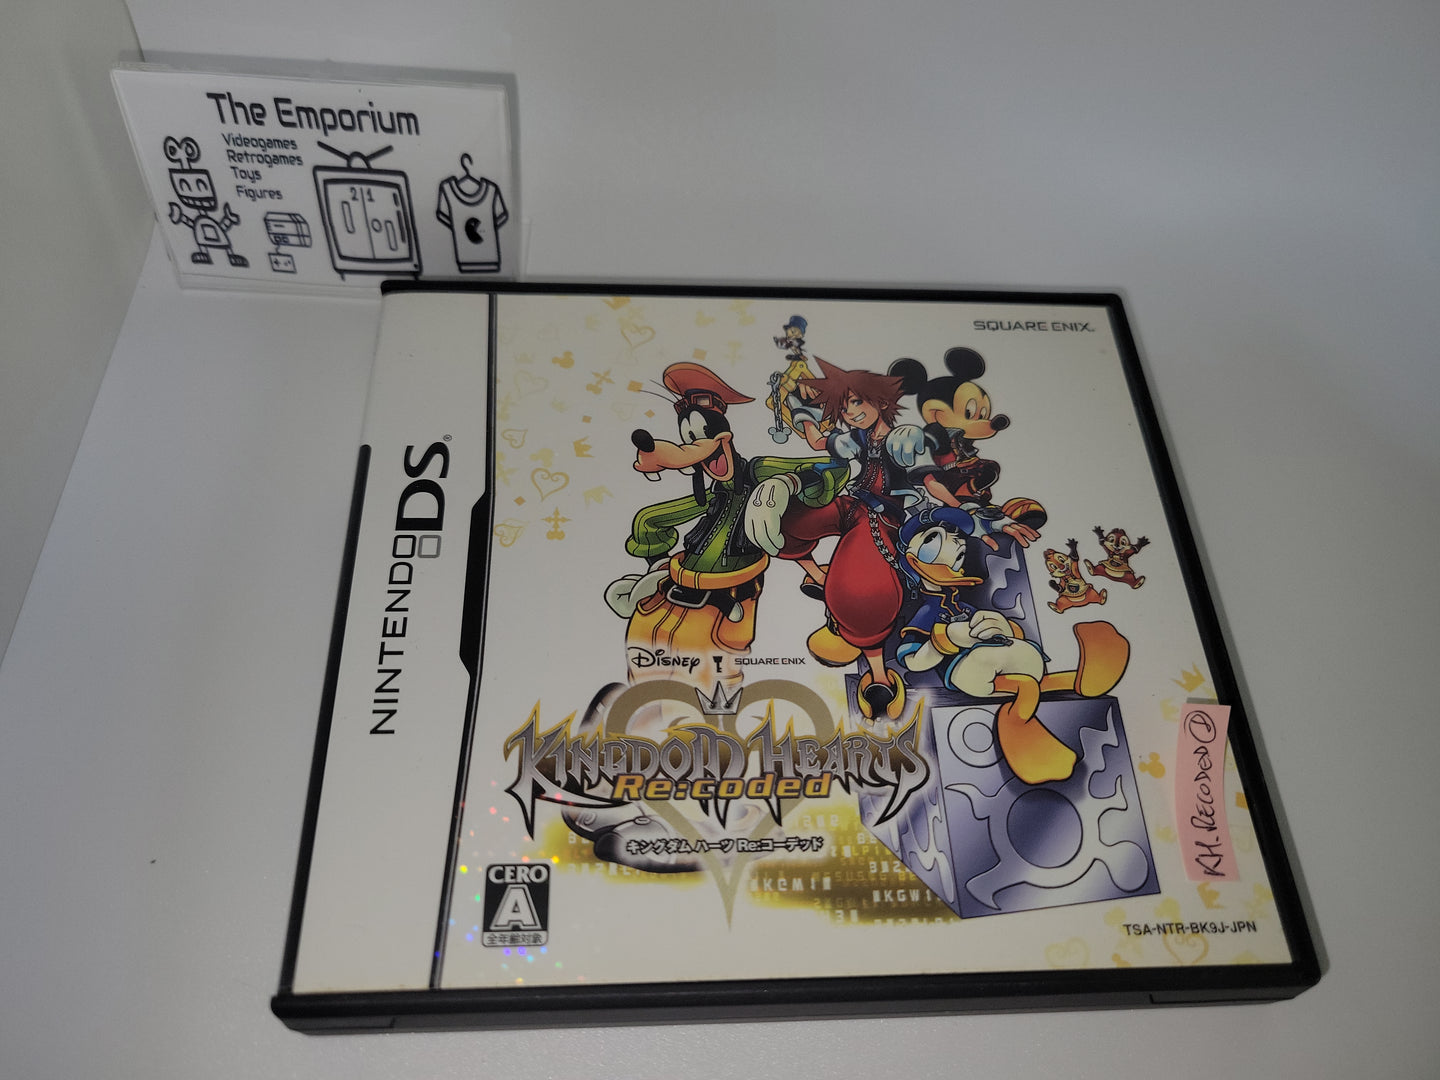 Kingdom Hearts re:coded - Nintendo Ds NDS